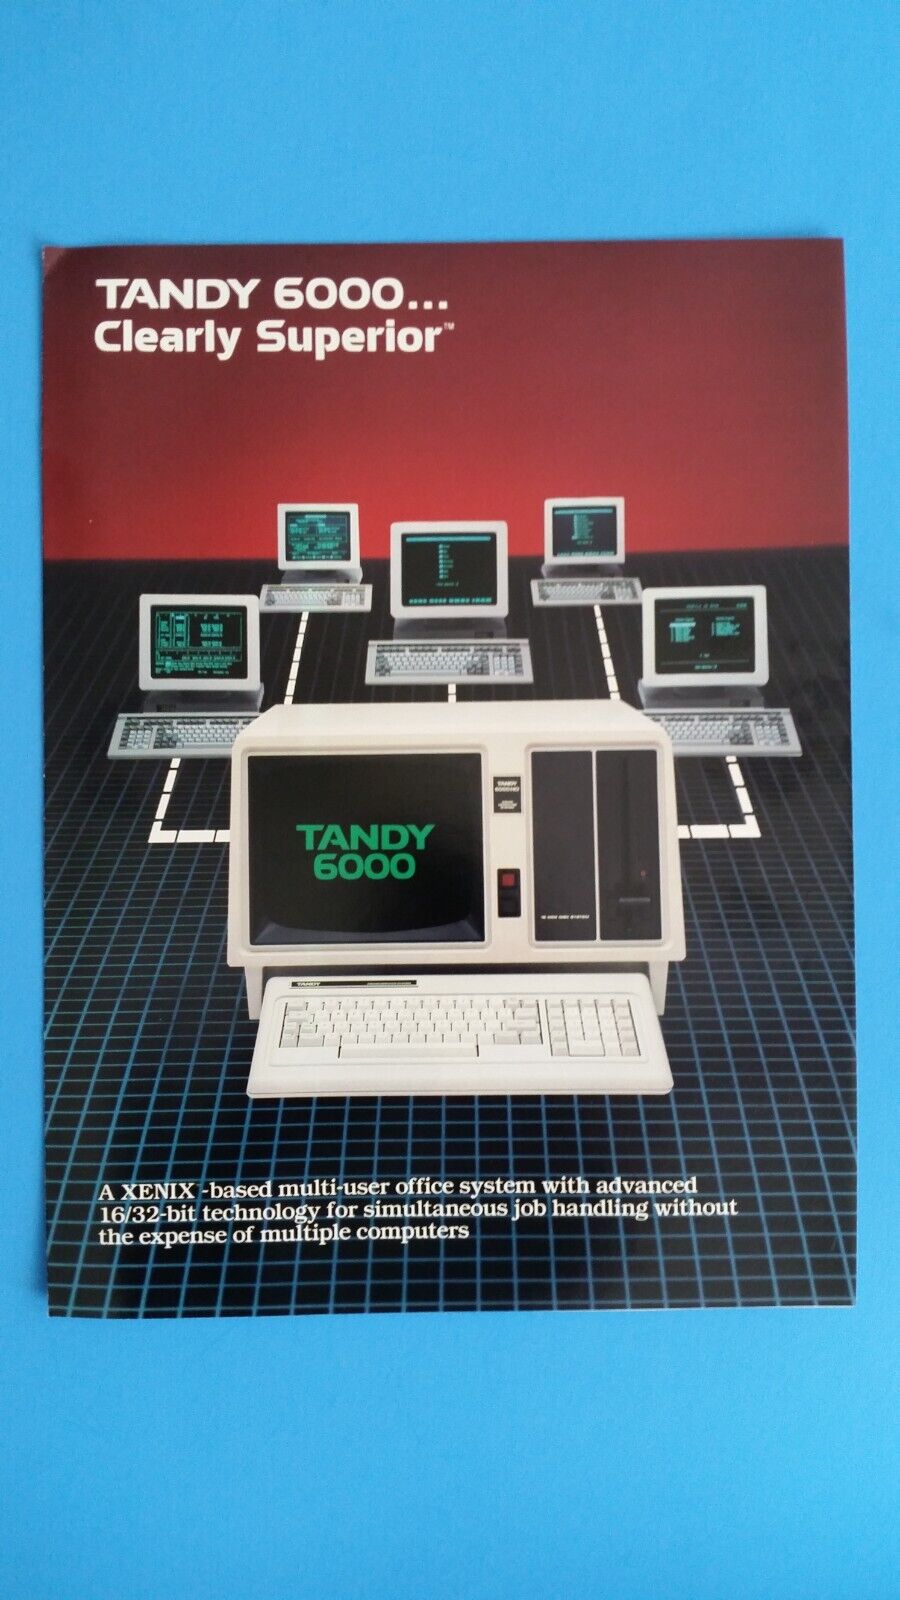 RPSi92's Tandy 6000 Clearly Superior 6-page Brochure